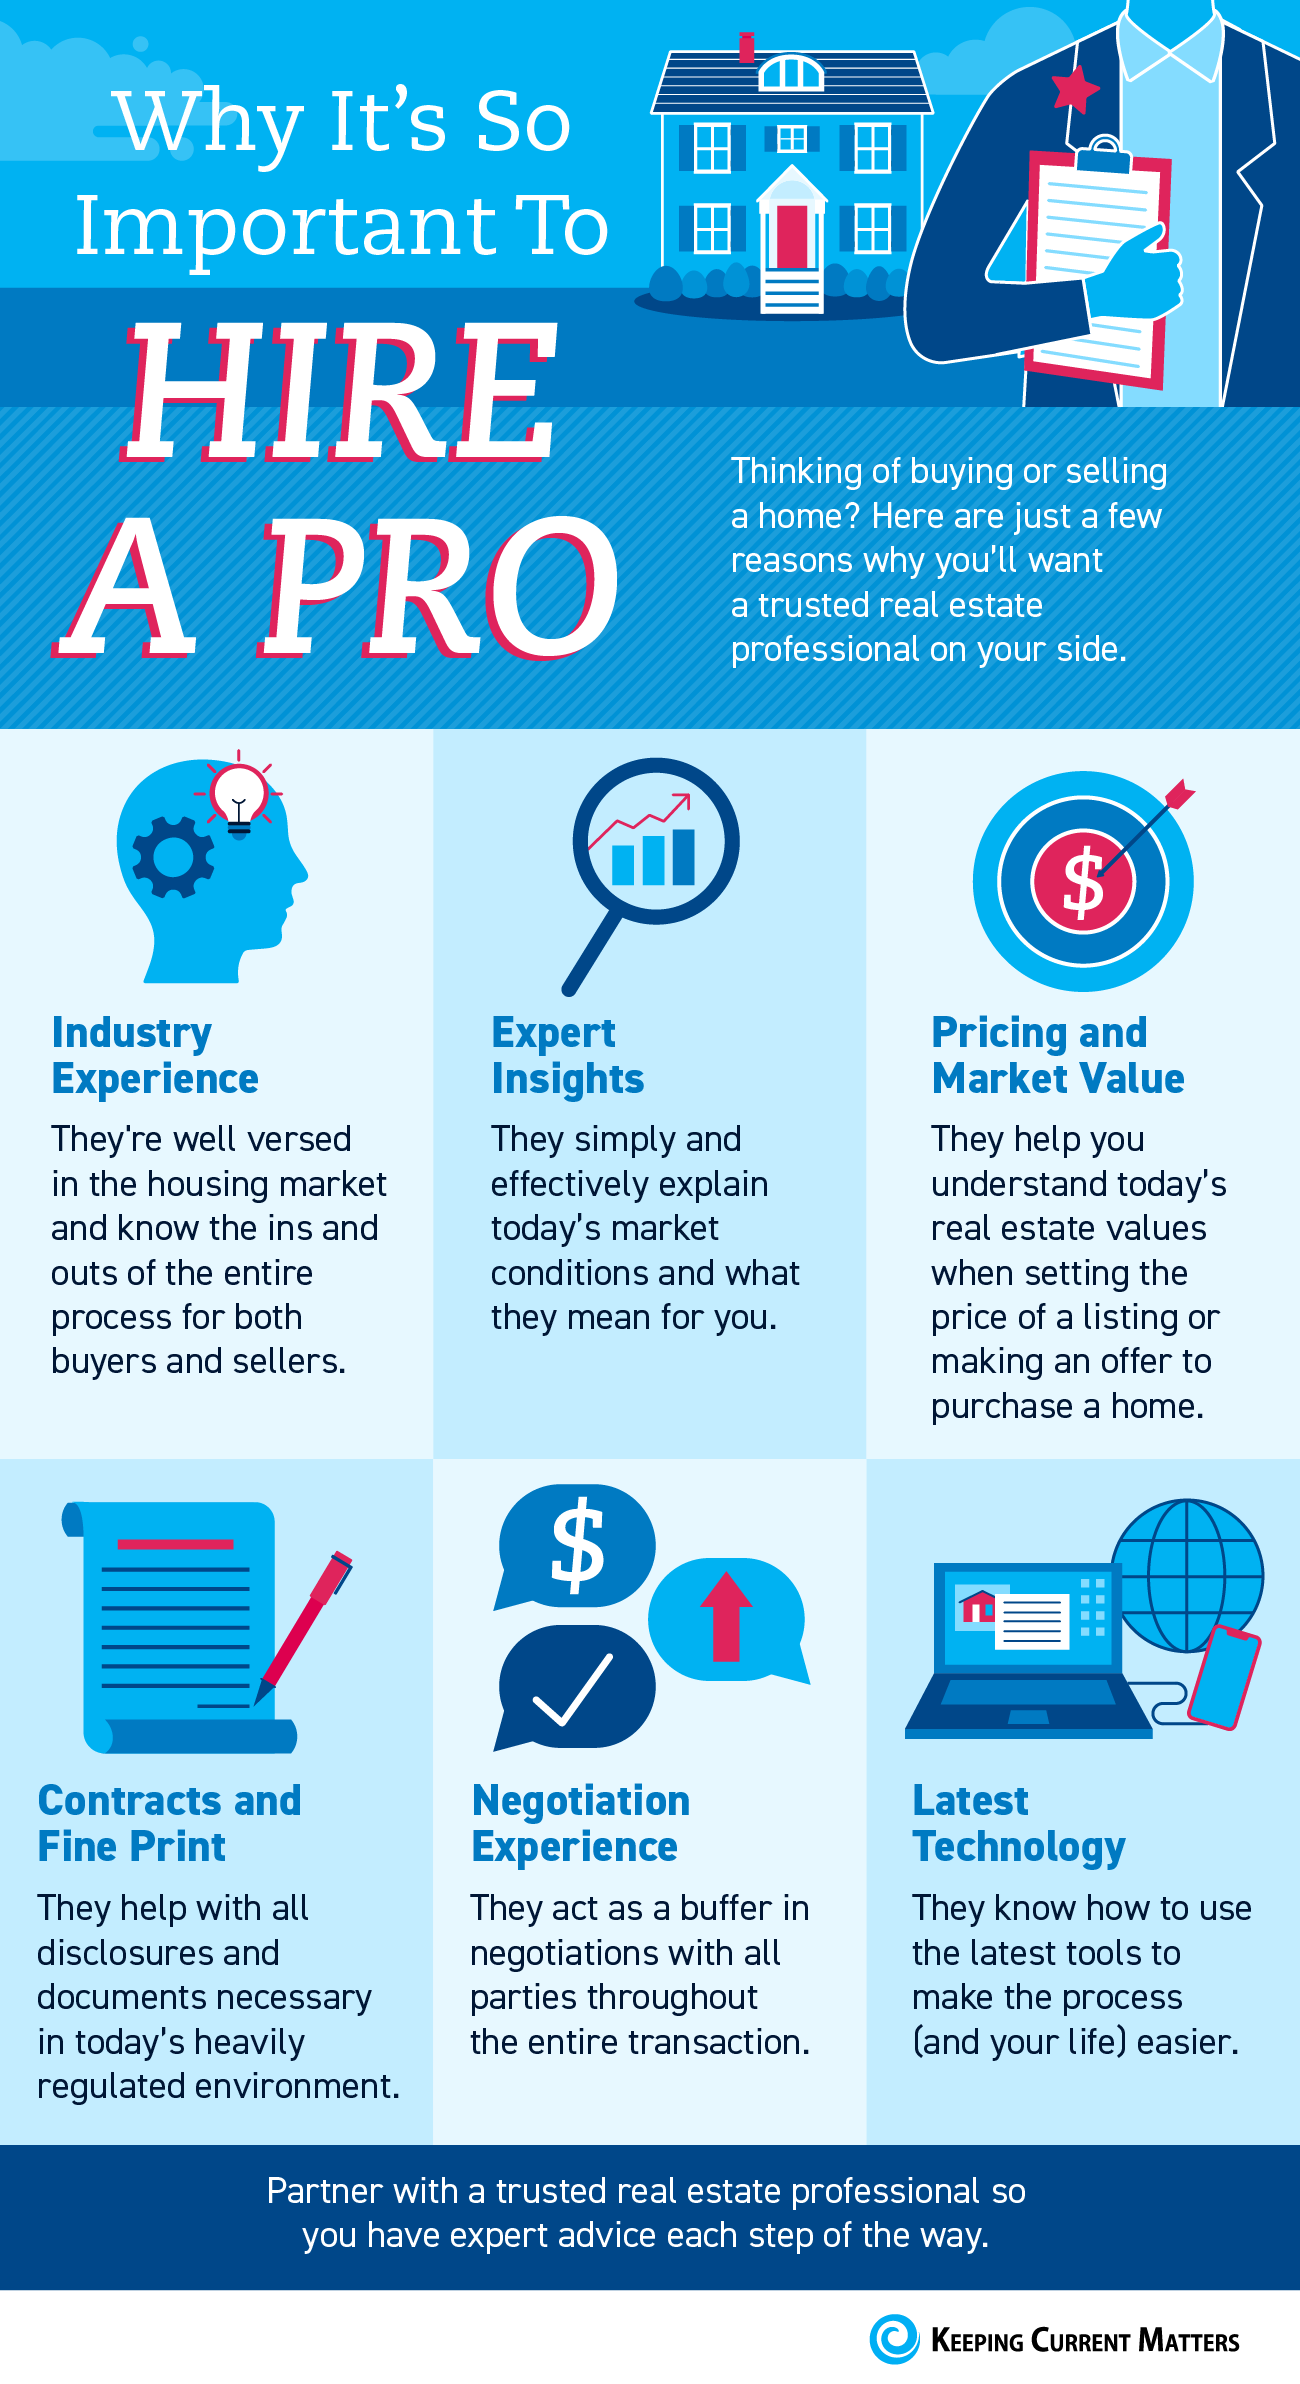 Why It’s So Important To Hire a Pro [INFOGRAPHIC] | Keeping Current Matters